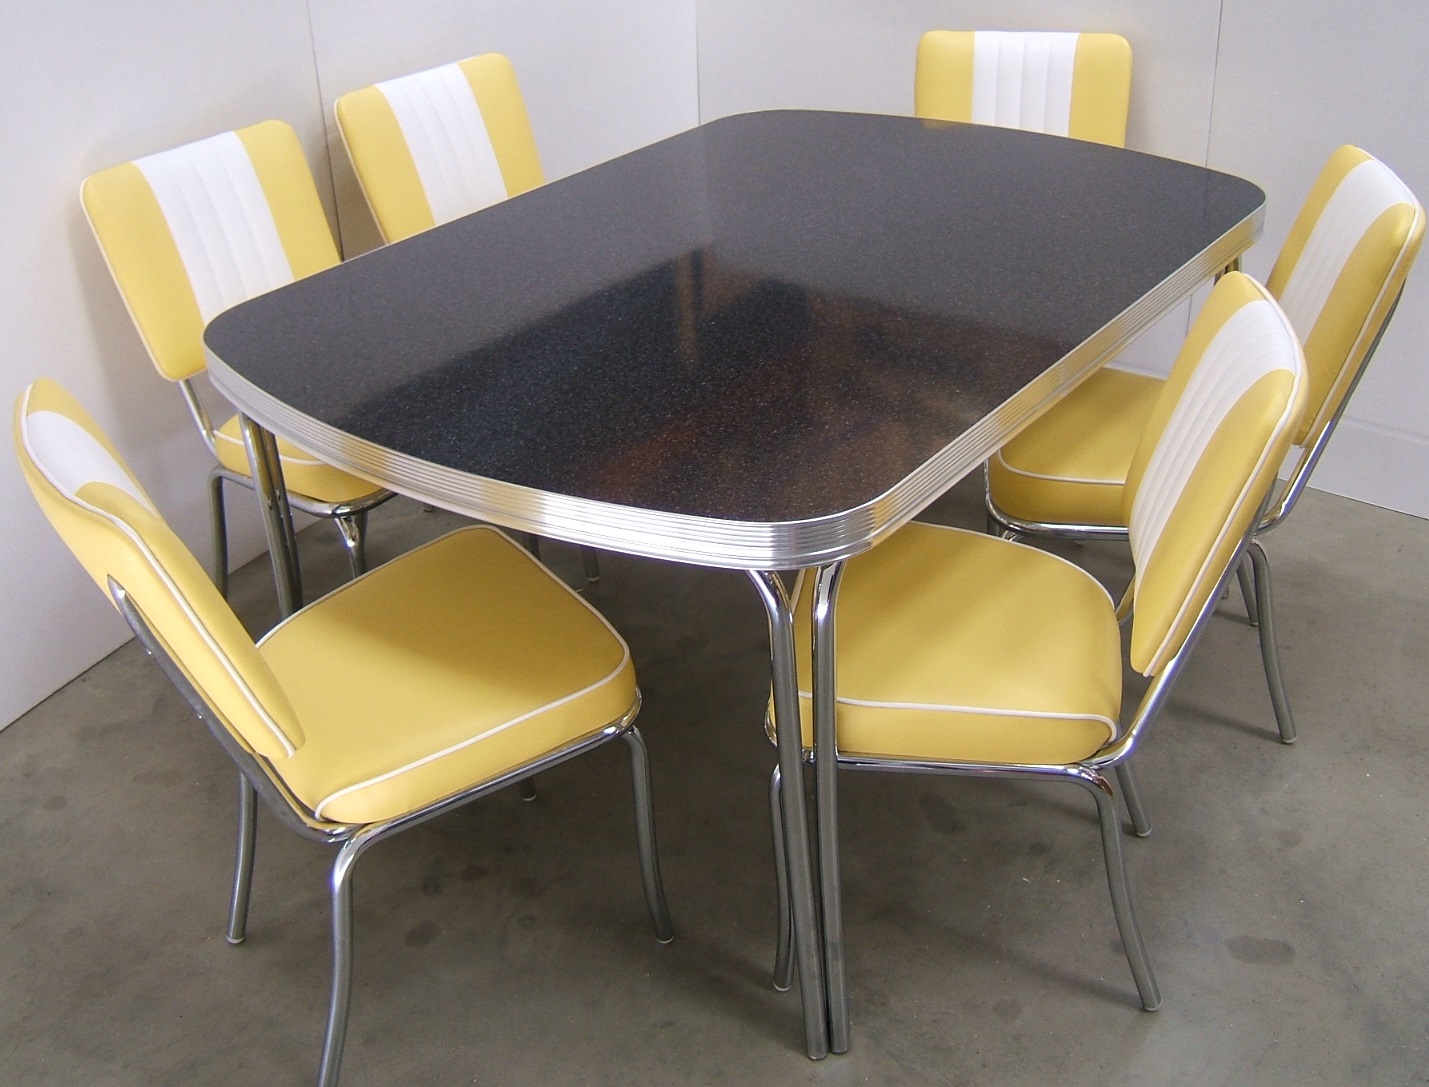 fifties style kitchen table